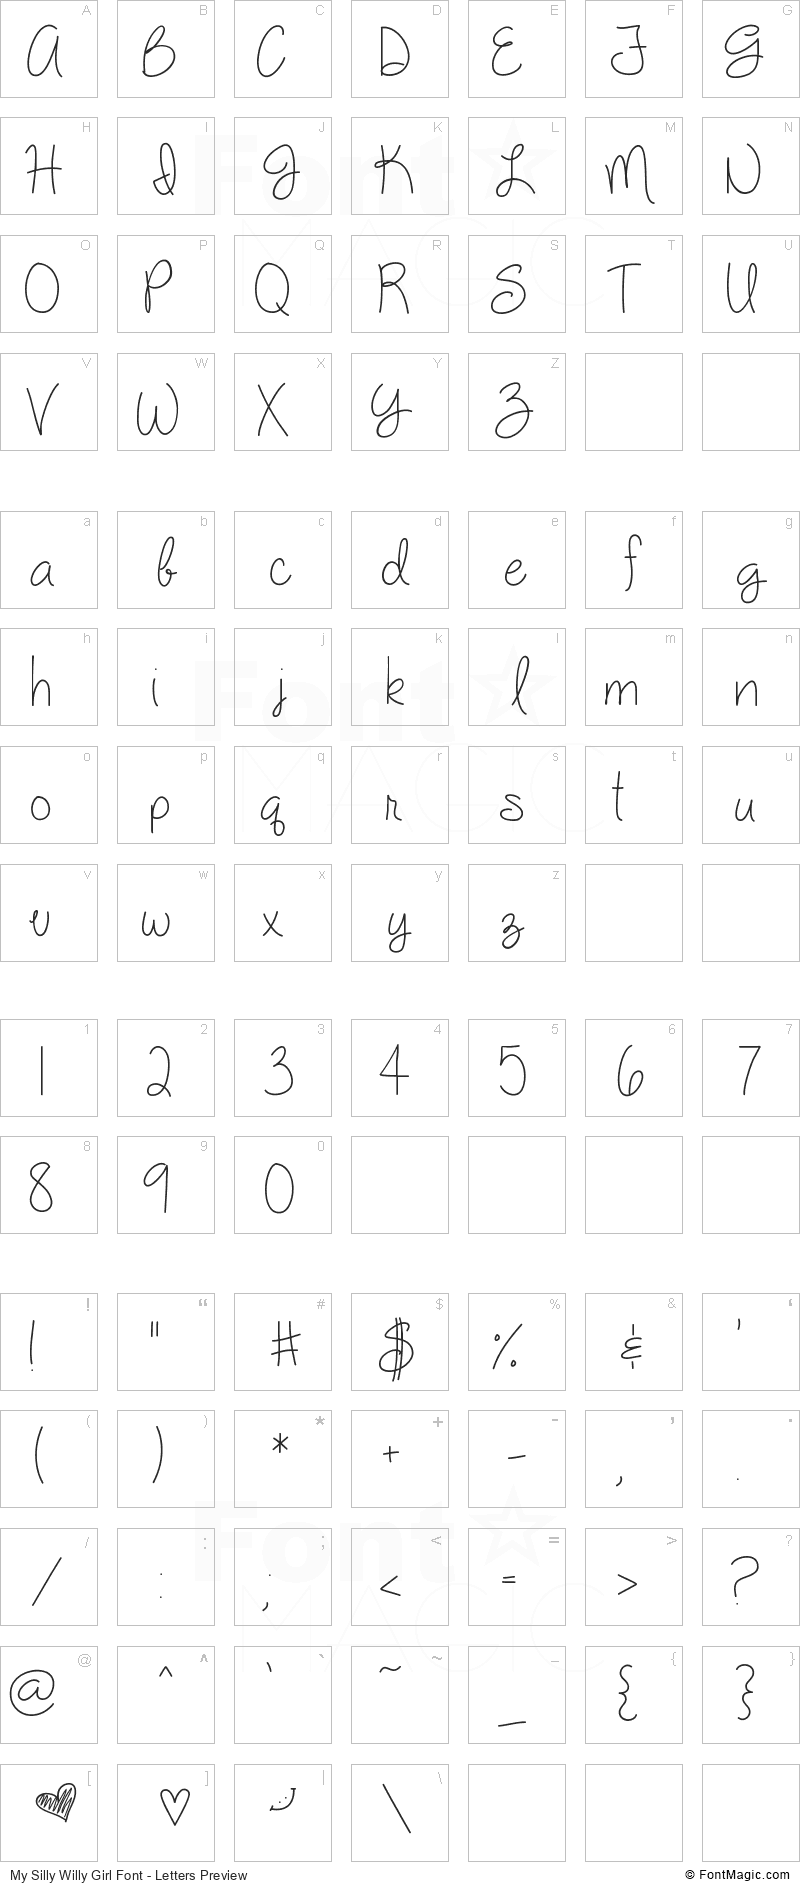 My Silly Willy Girl Font - All Latters Preview Chart